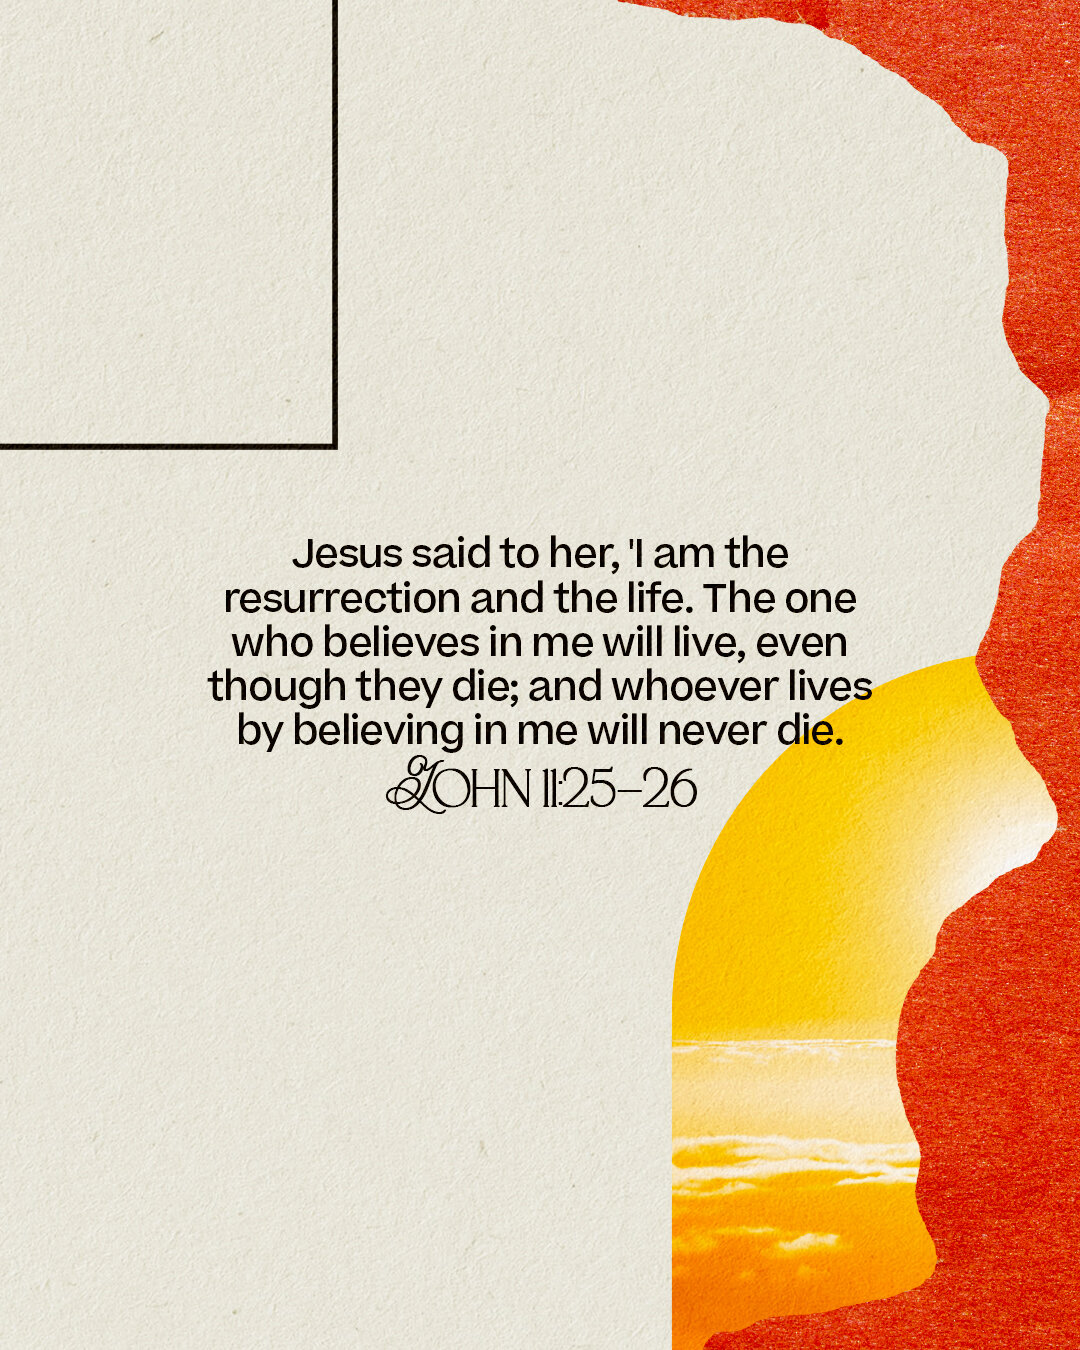 Read this truth today from John 11:25-26. Easter is coming! We can't wait to celebrate together.

newlifewayland.org/easter